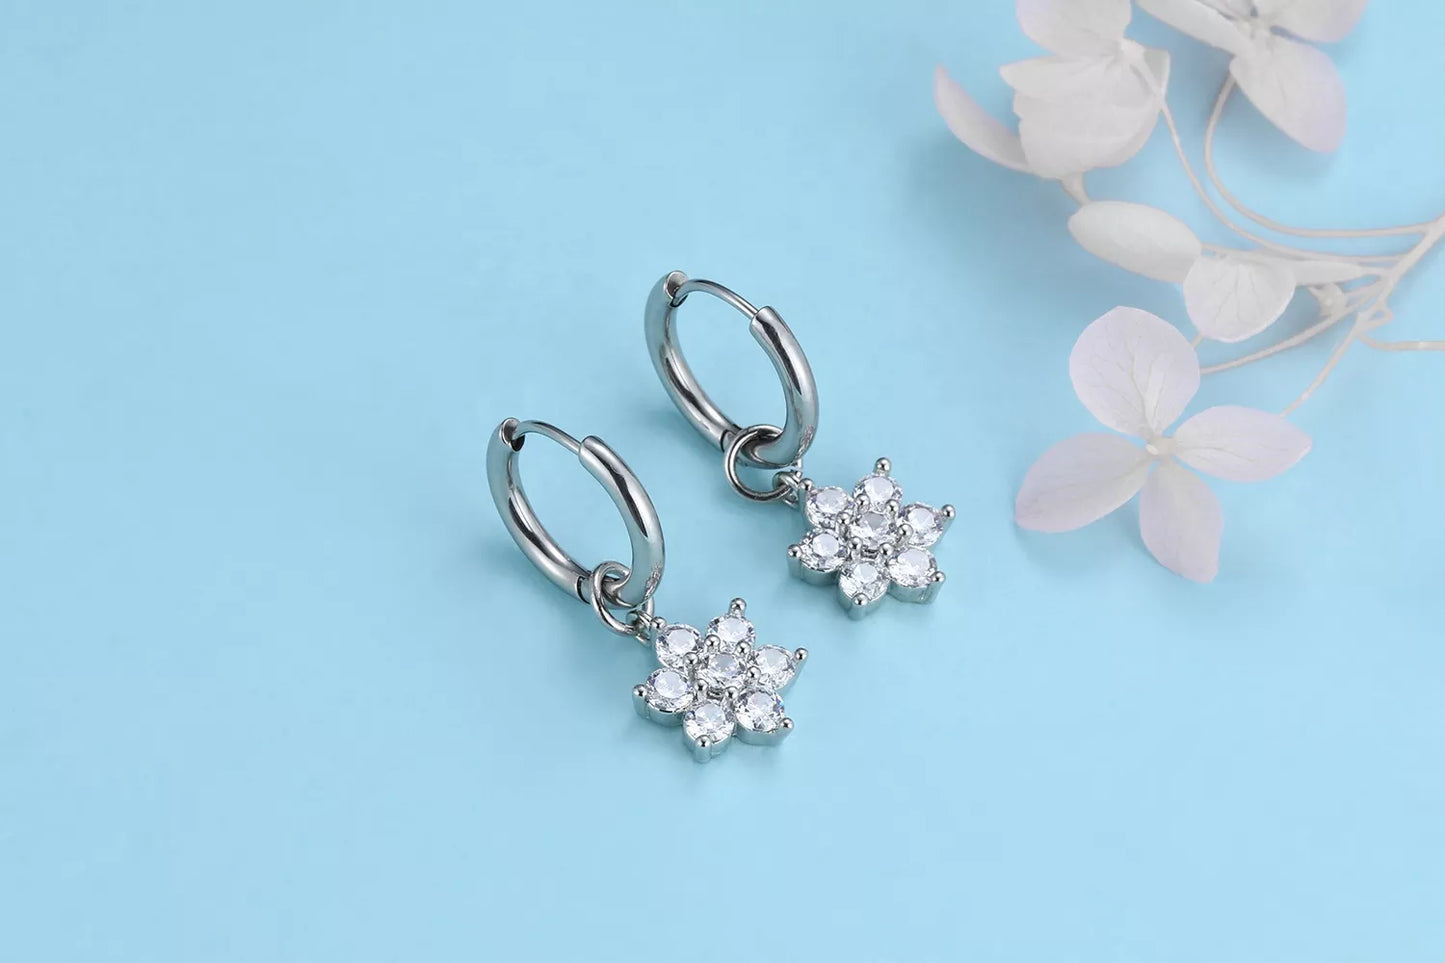 Children's, Teens' and Mothers' Earrings:  Surgical Steel Hoops with CZ Flowers